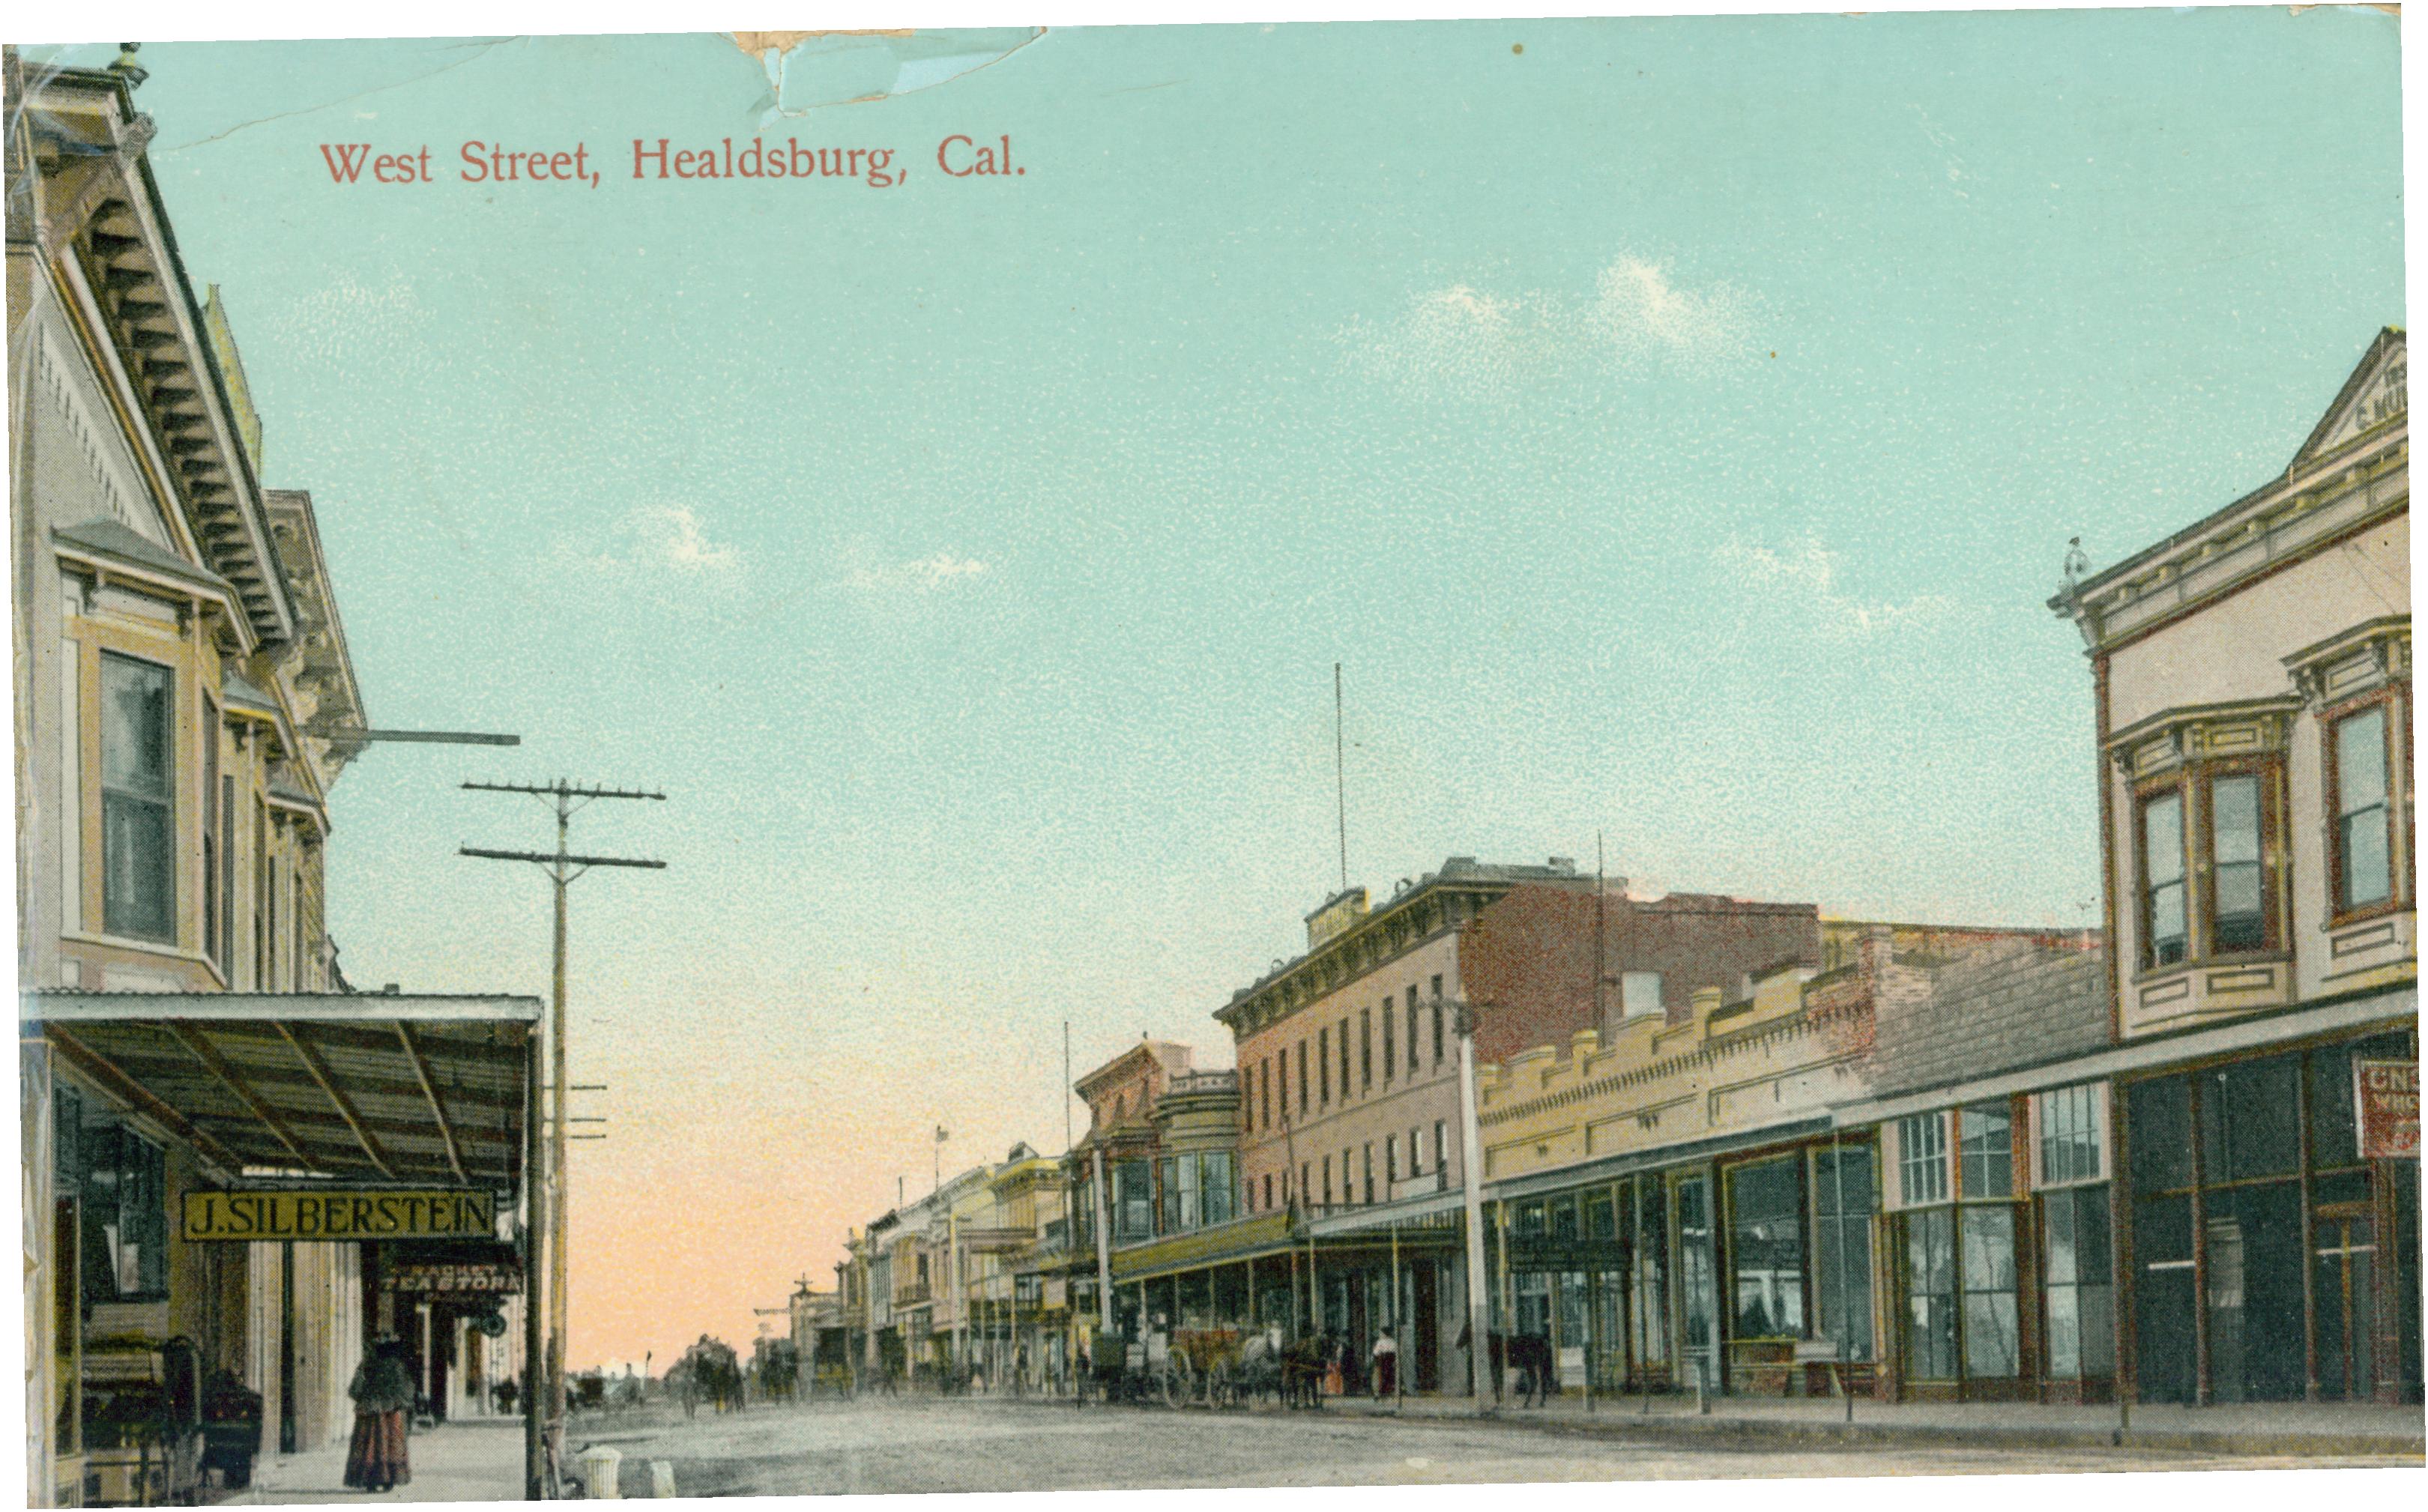 Shows West Street in Healdsburg lined by buildings.